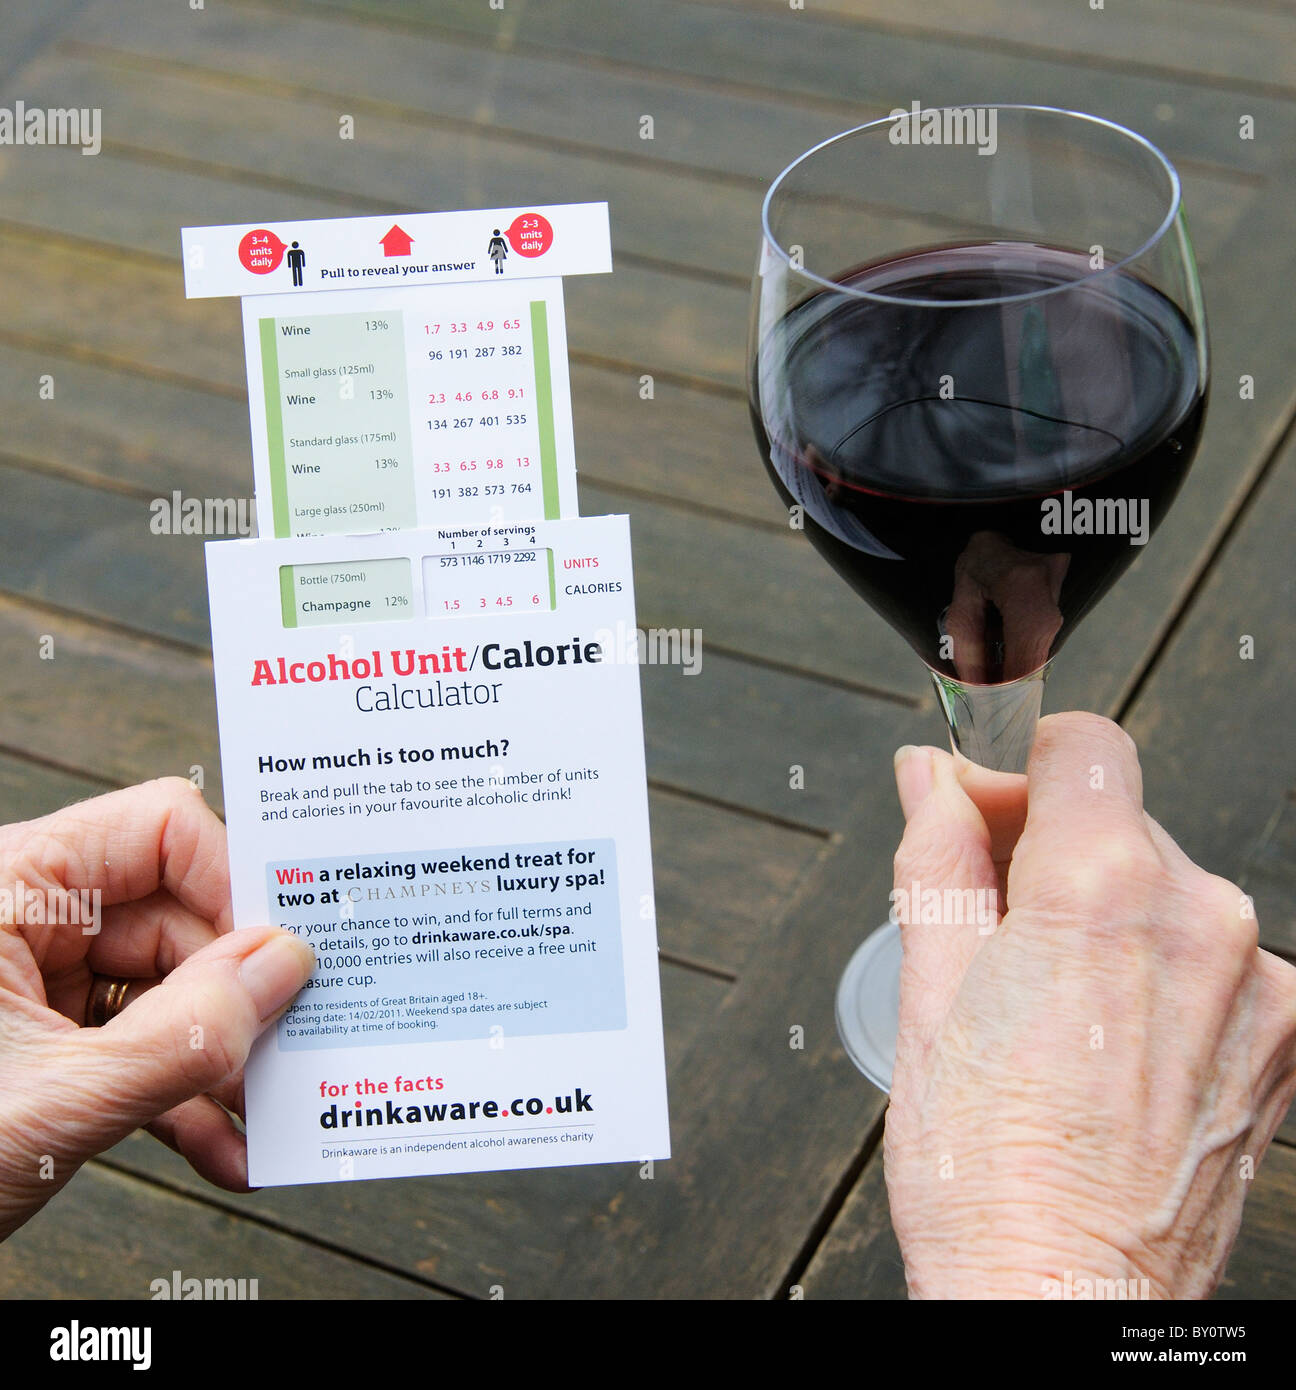 Red Wine Calorie Chart